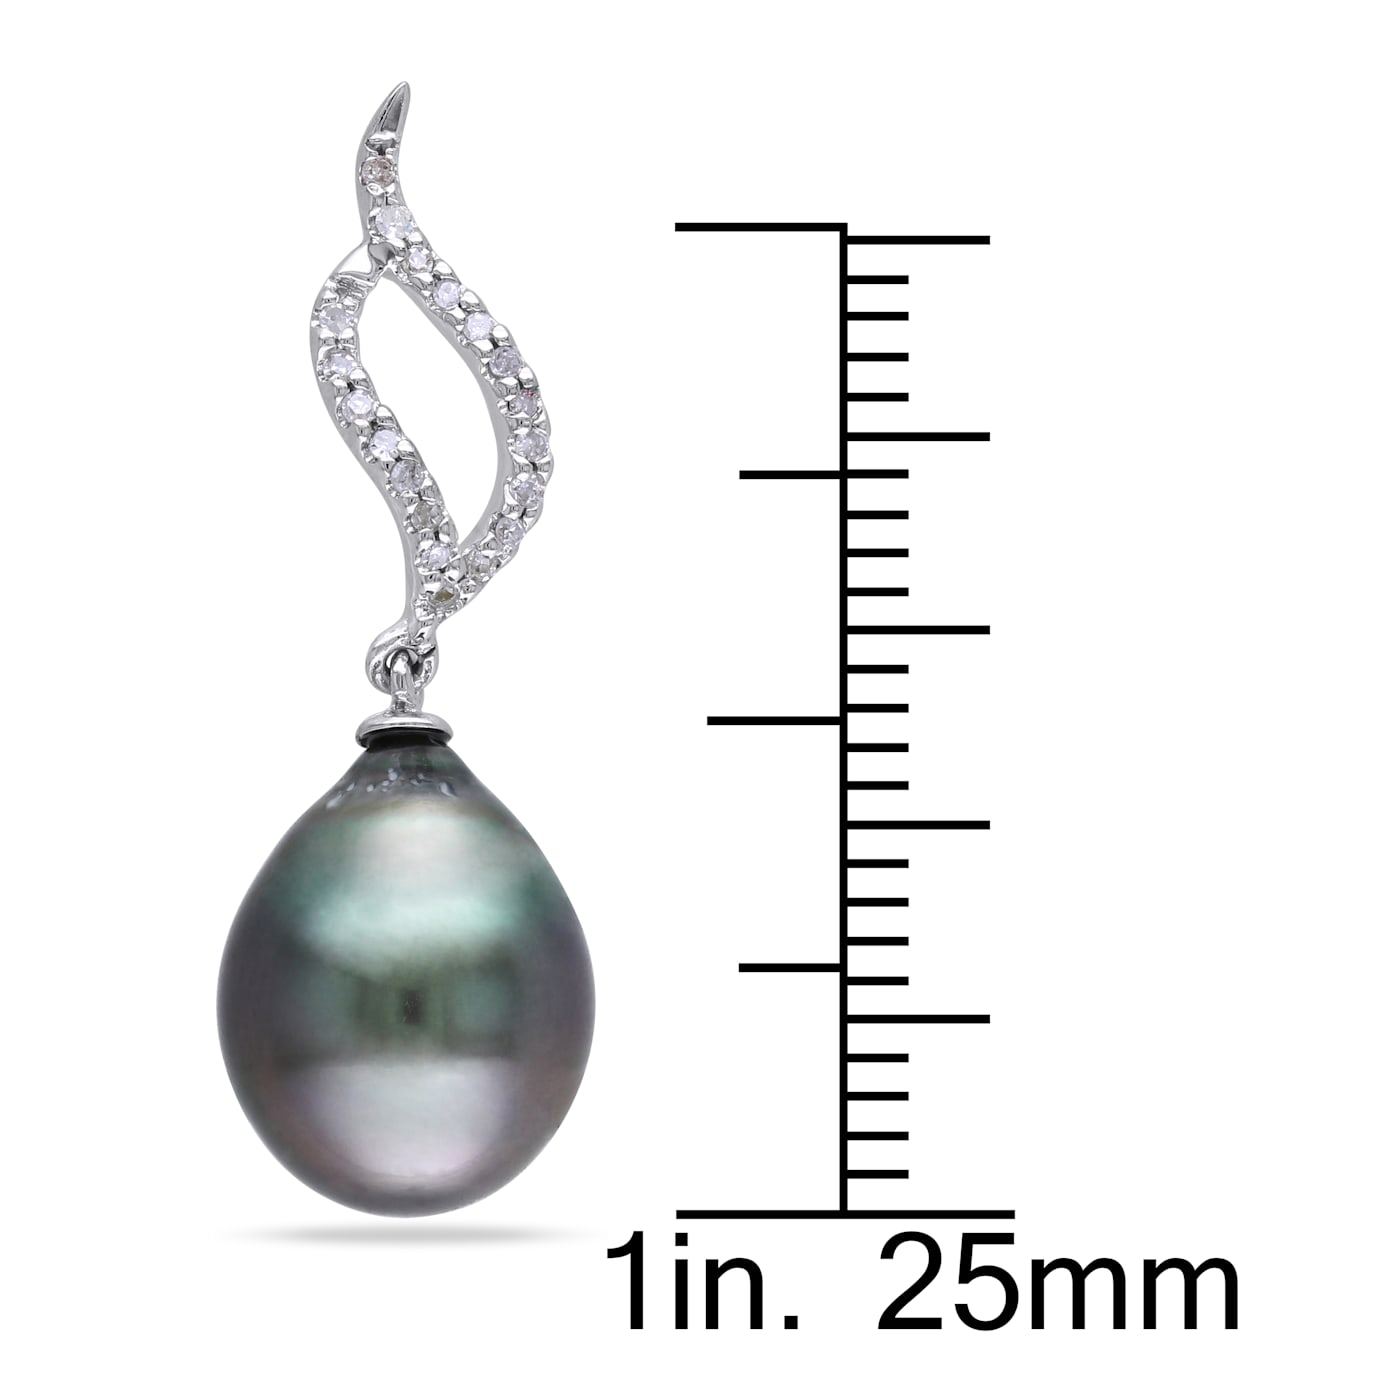 8.5-9 mm Cultured Pearl and .10 ct. t.w. Diamond Bow Earrings in